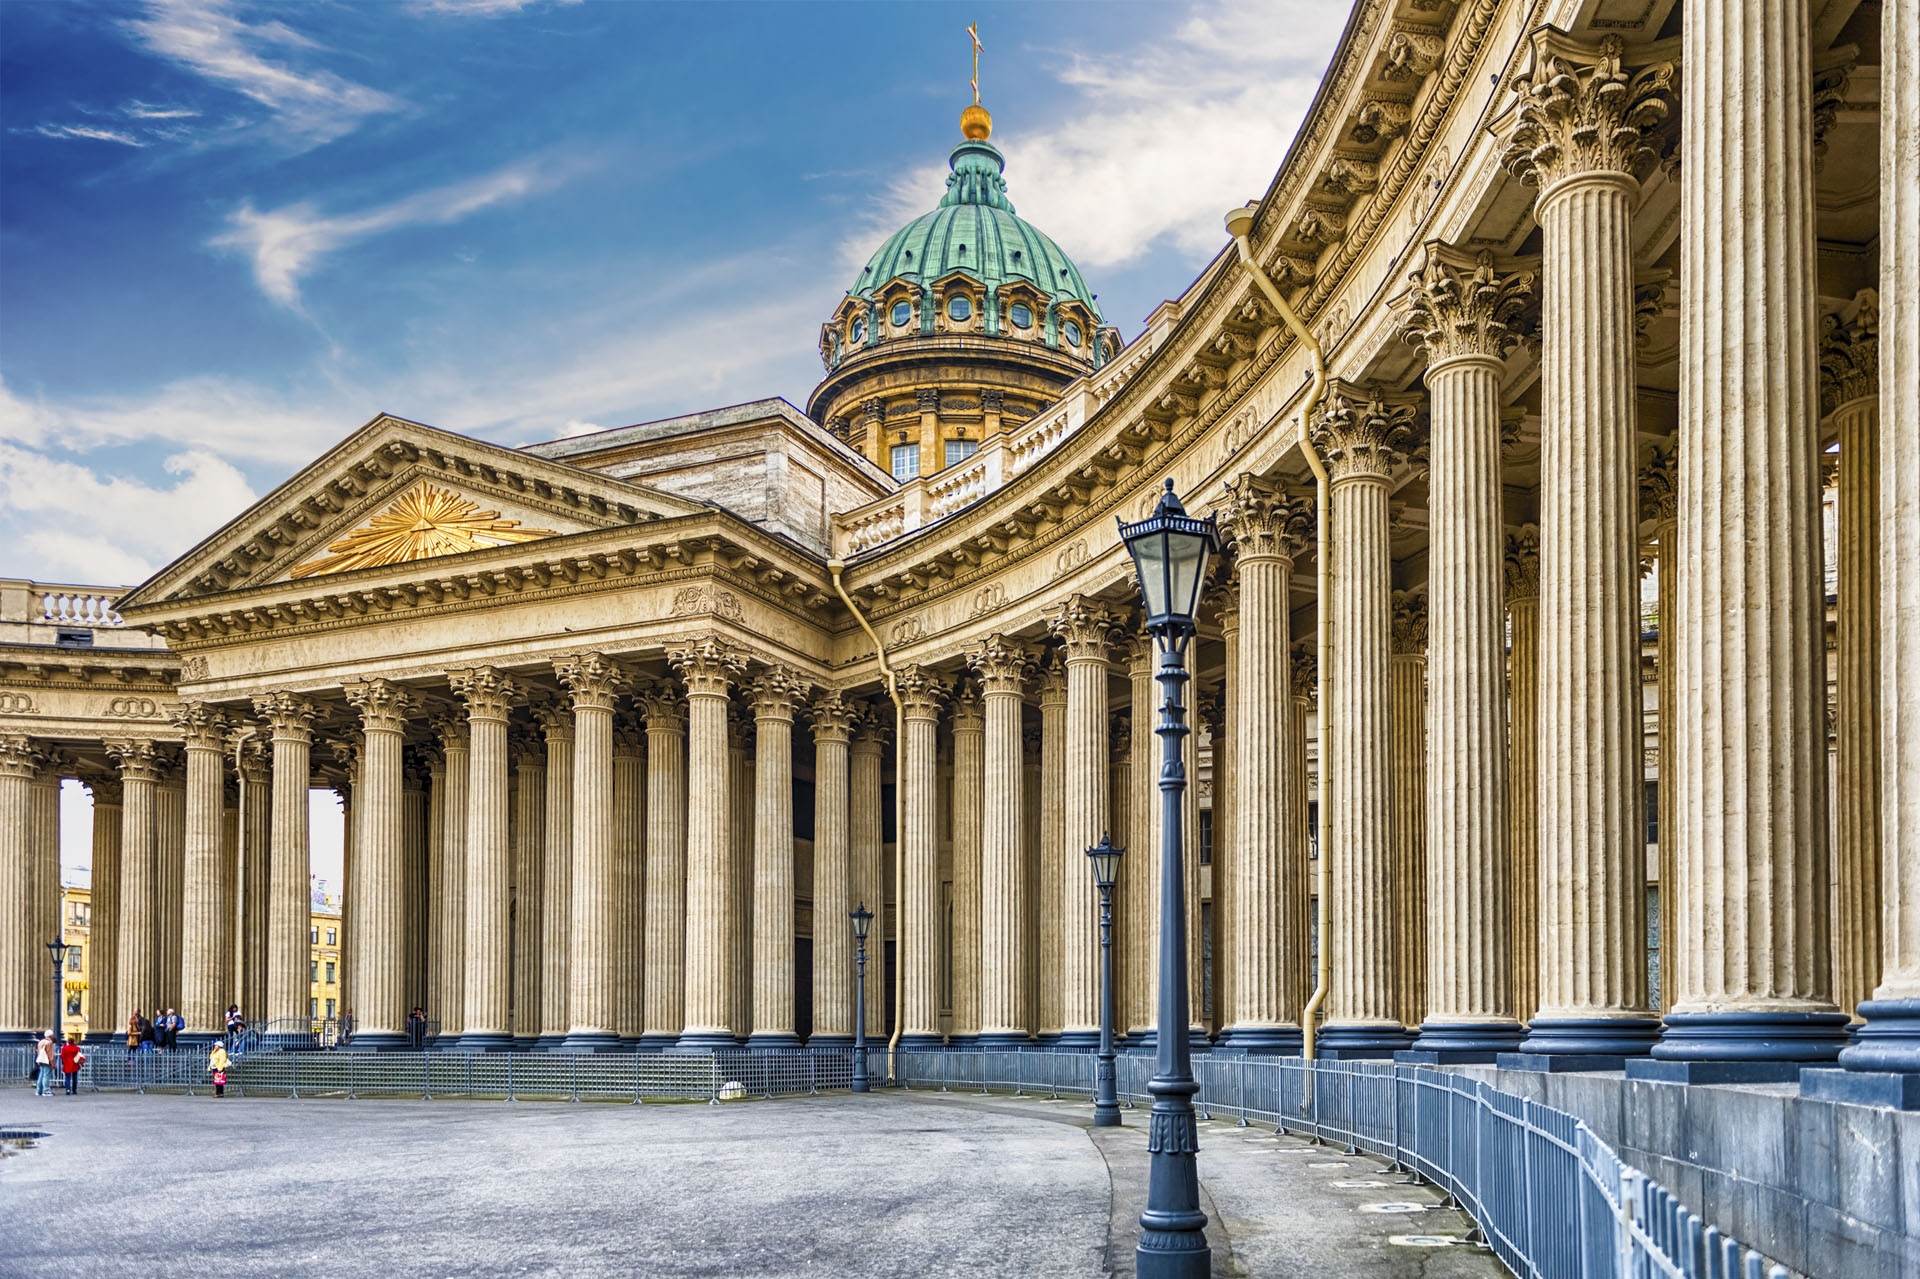 Facade and colonnade of Kazan Cathedral in St. Petersburg, Russia